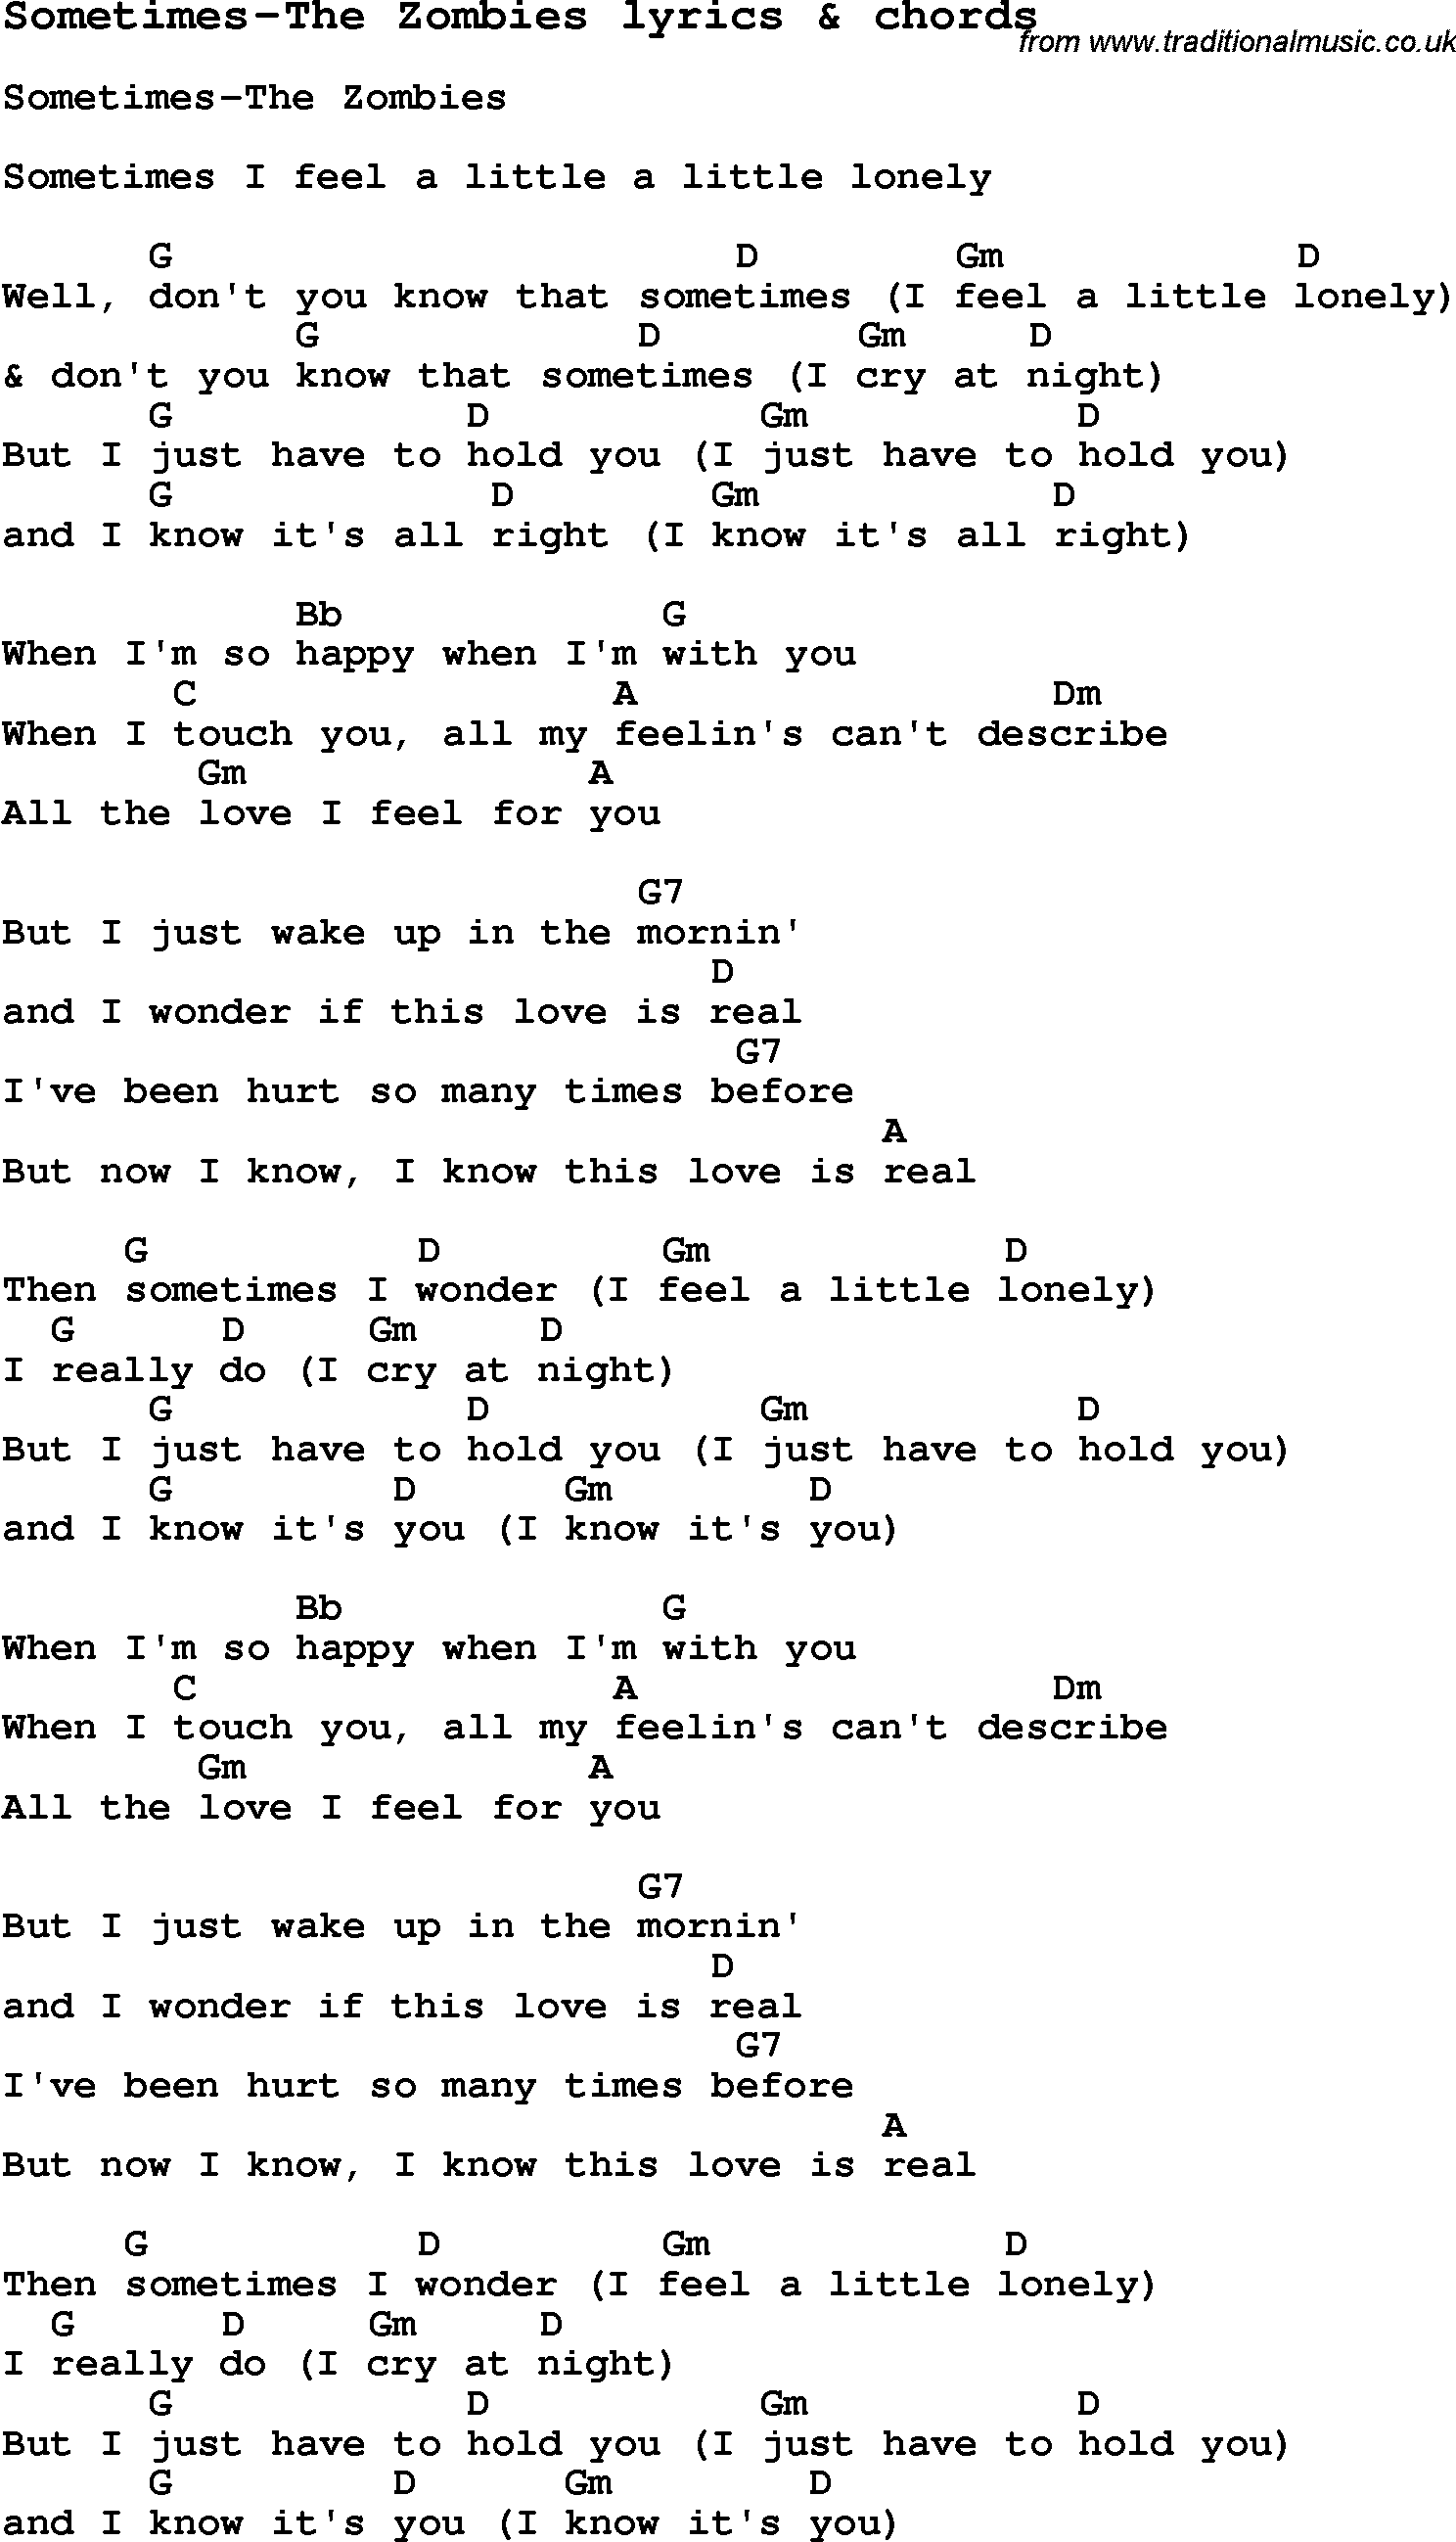 Love Song Lyrics for: Sometimes-The Zombies with chords for Ukulele, Guitar Banjo etc.